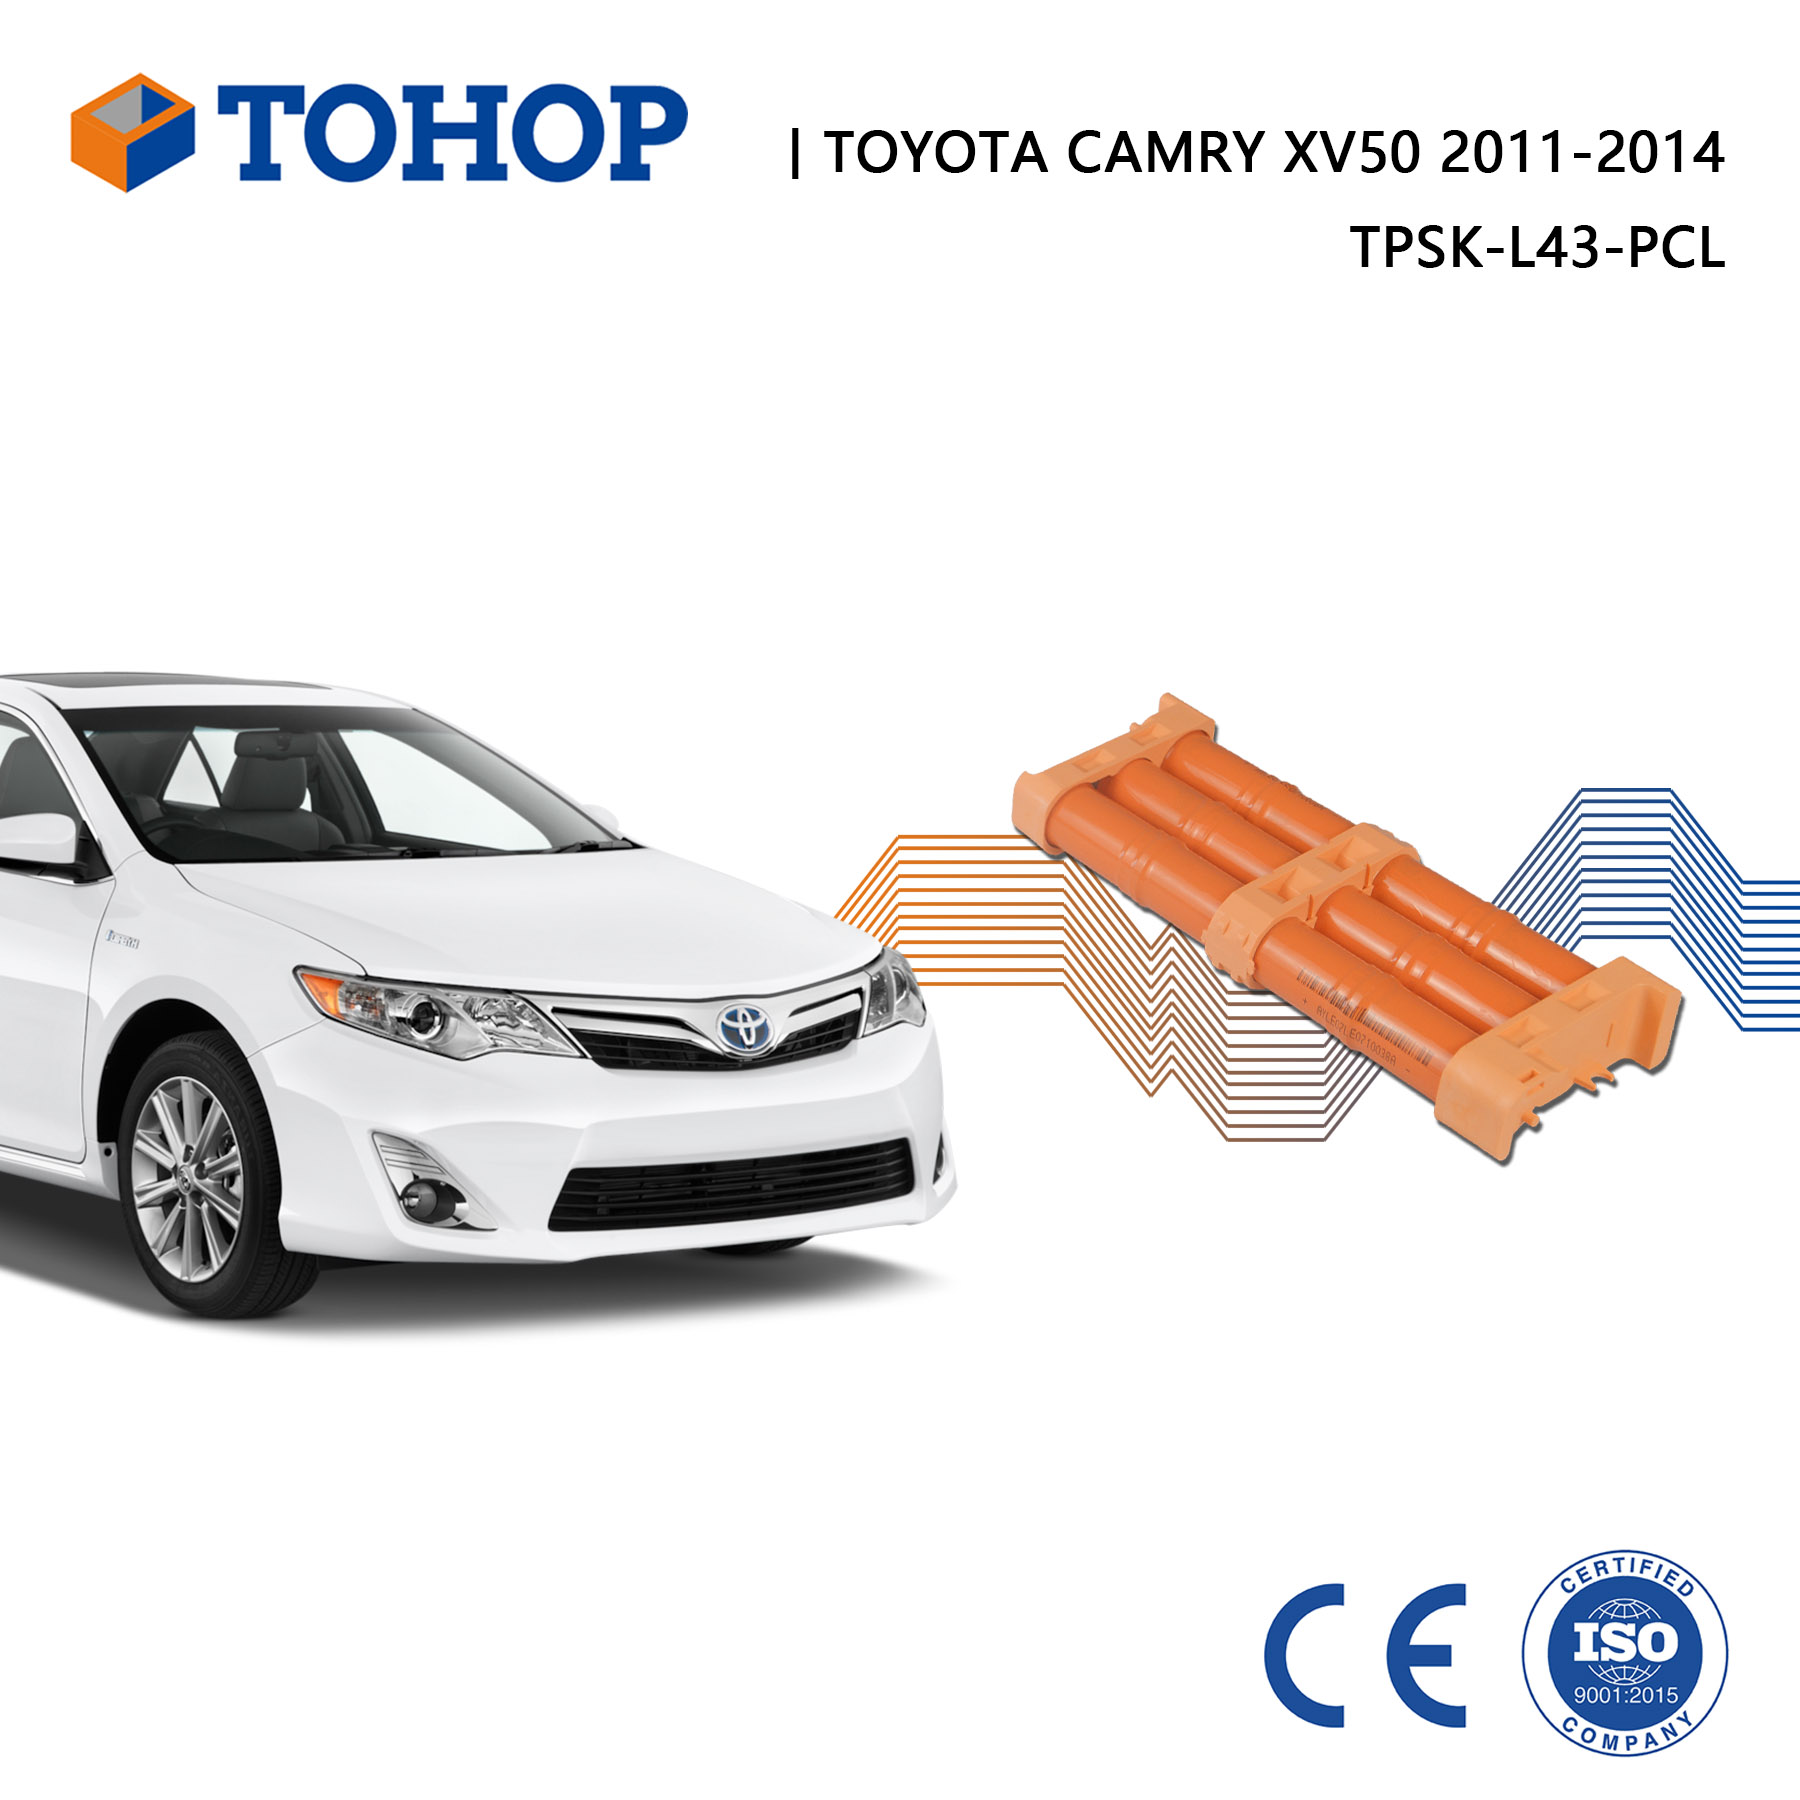 Brand New Battery Cells for Toyota Camry Hybrid Battery Replacement 2012 - 2016